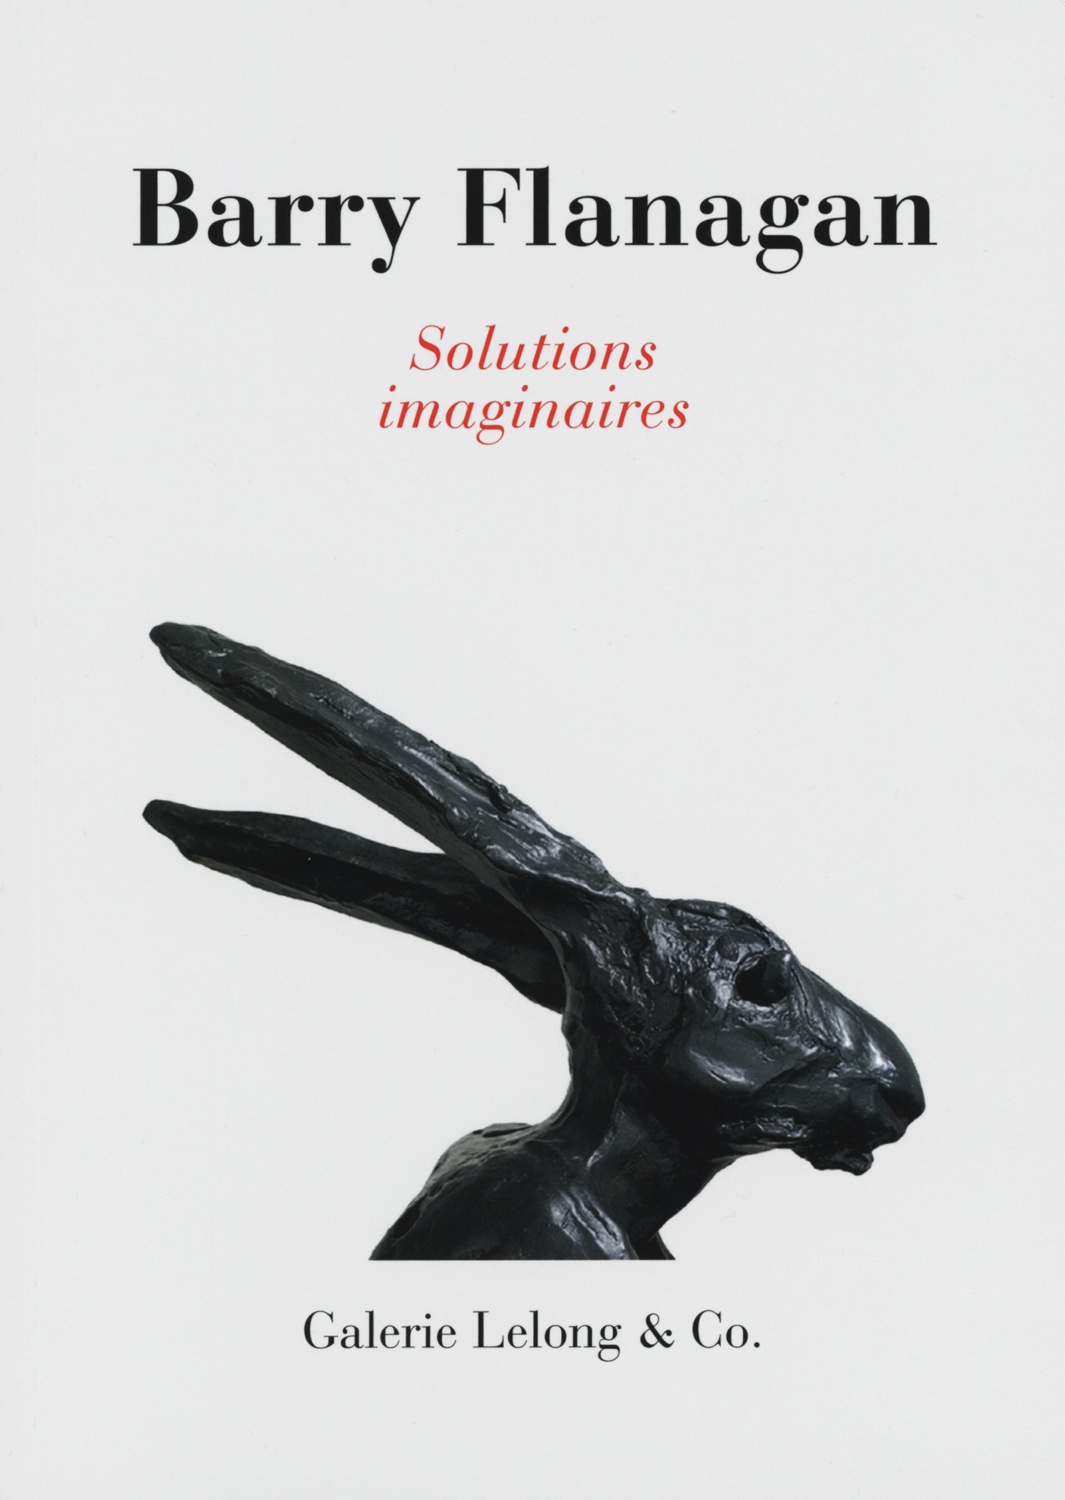 Barry Flanagan, Solutions imaginaires